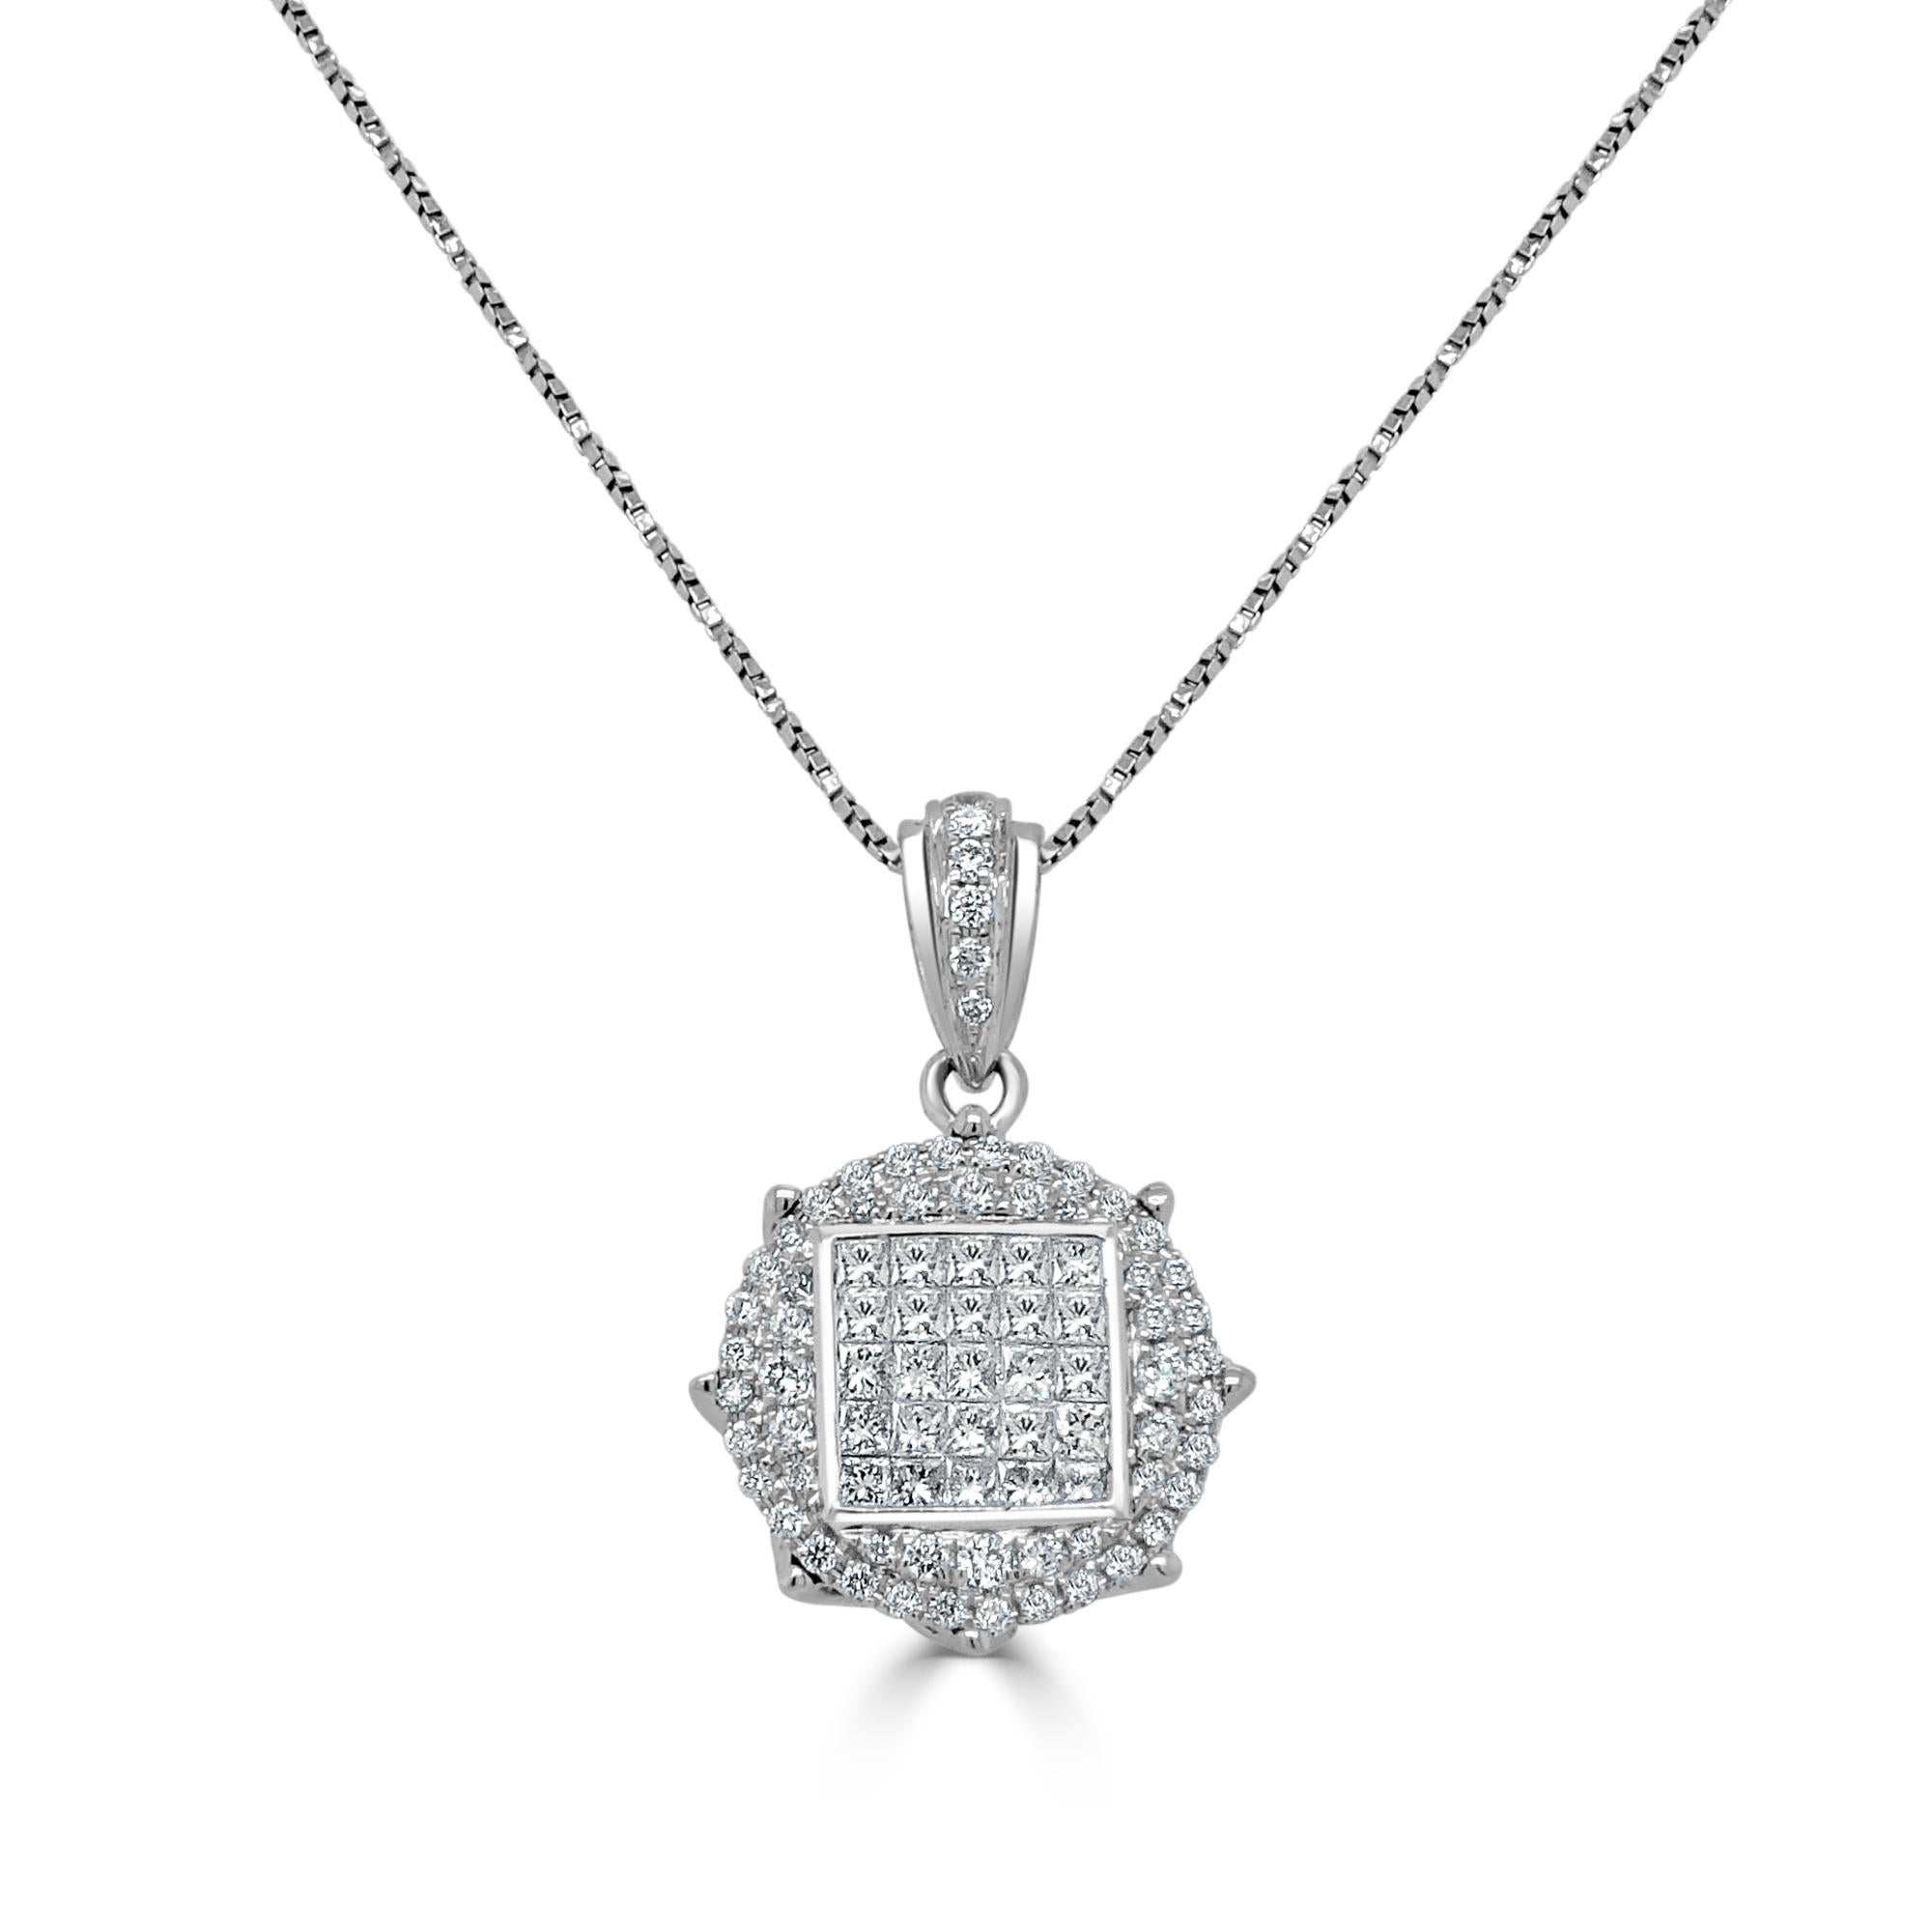 18 Karat White Gold 0.83 Carat Diamond Chain Necklace Wedding Fine Jewelry 

Gentle and elegant pendant is crafted in a sleek white gold. Featuring round cut diamonds, together totaling 0.83 TCW. Suspended from a 16-inch stunning non-tangle, non